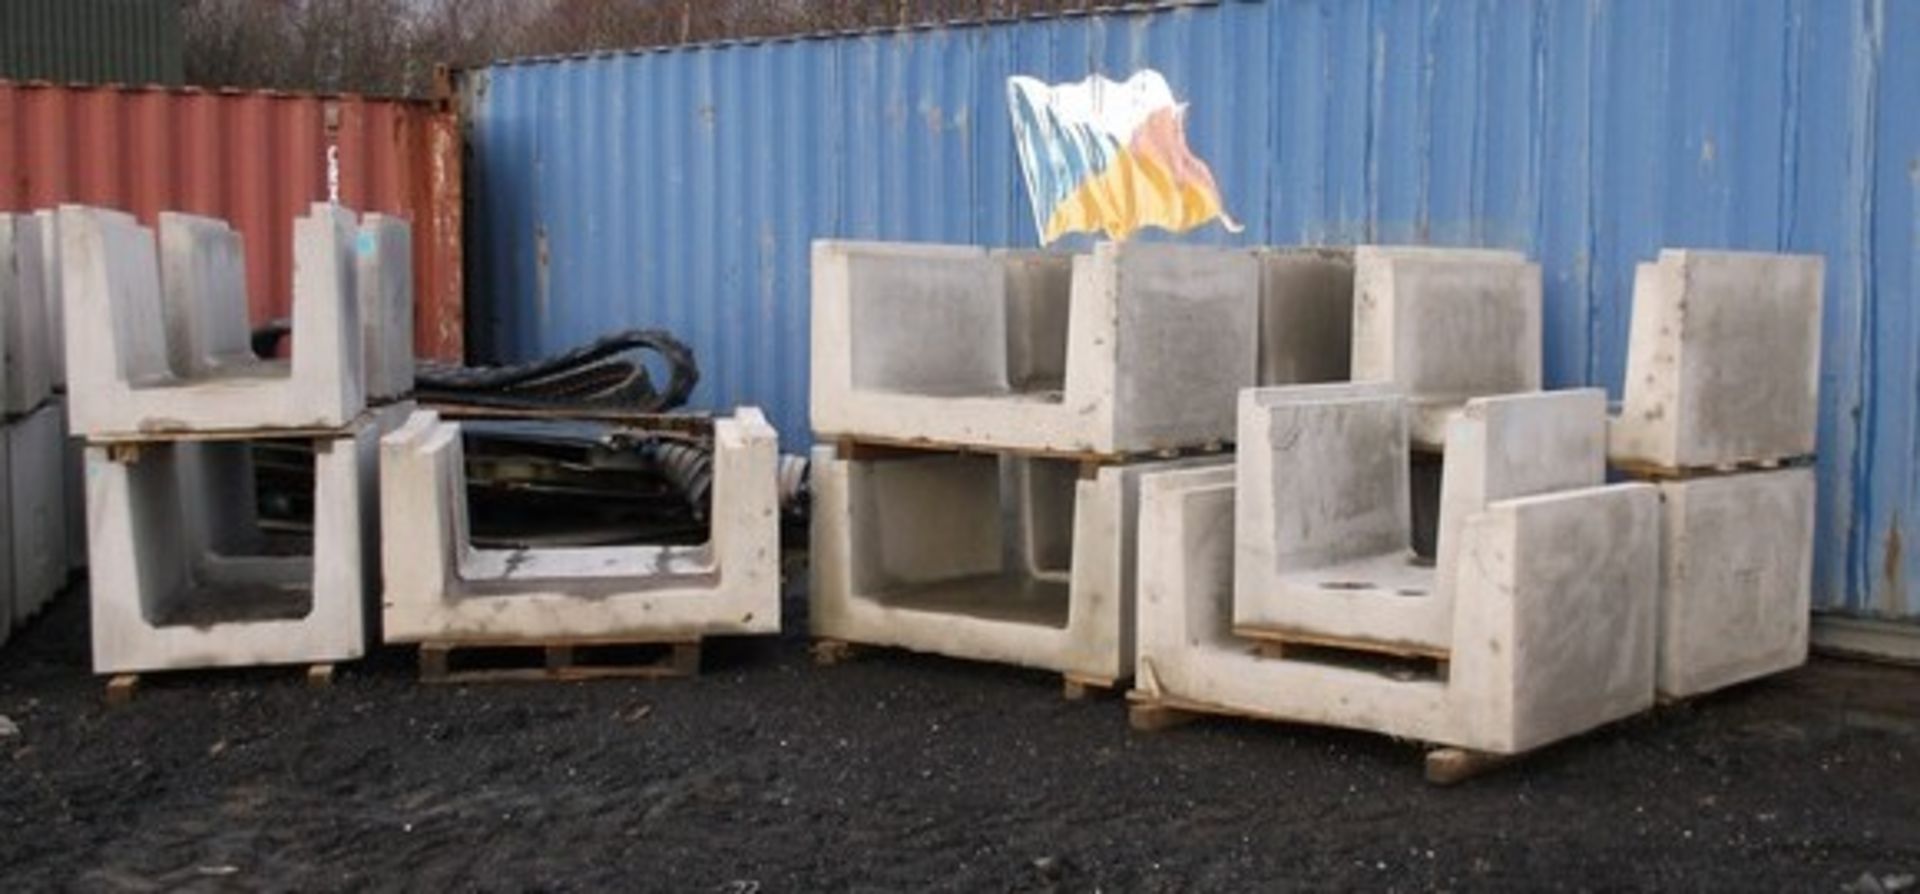 SELECTION OF EASI-DUCT CONCRETE CABLE TROUGHS (APPROX 36) - Image 2 of 5